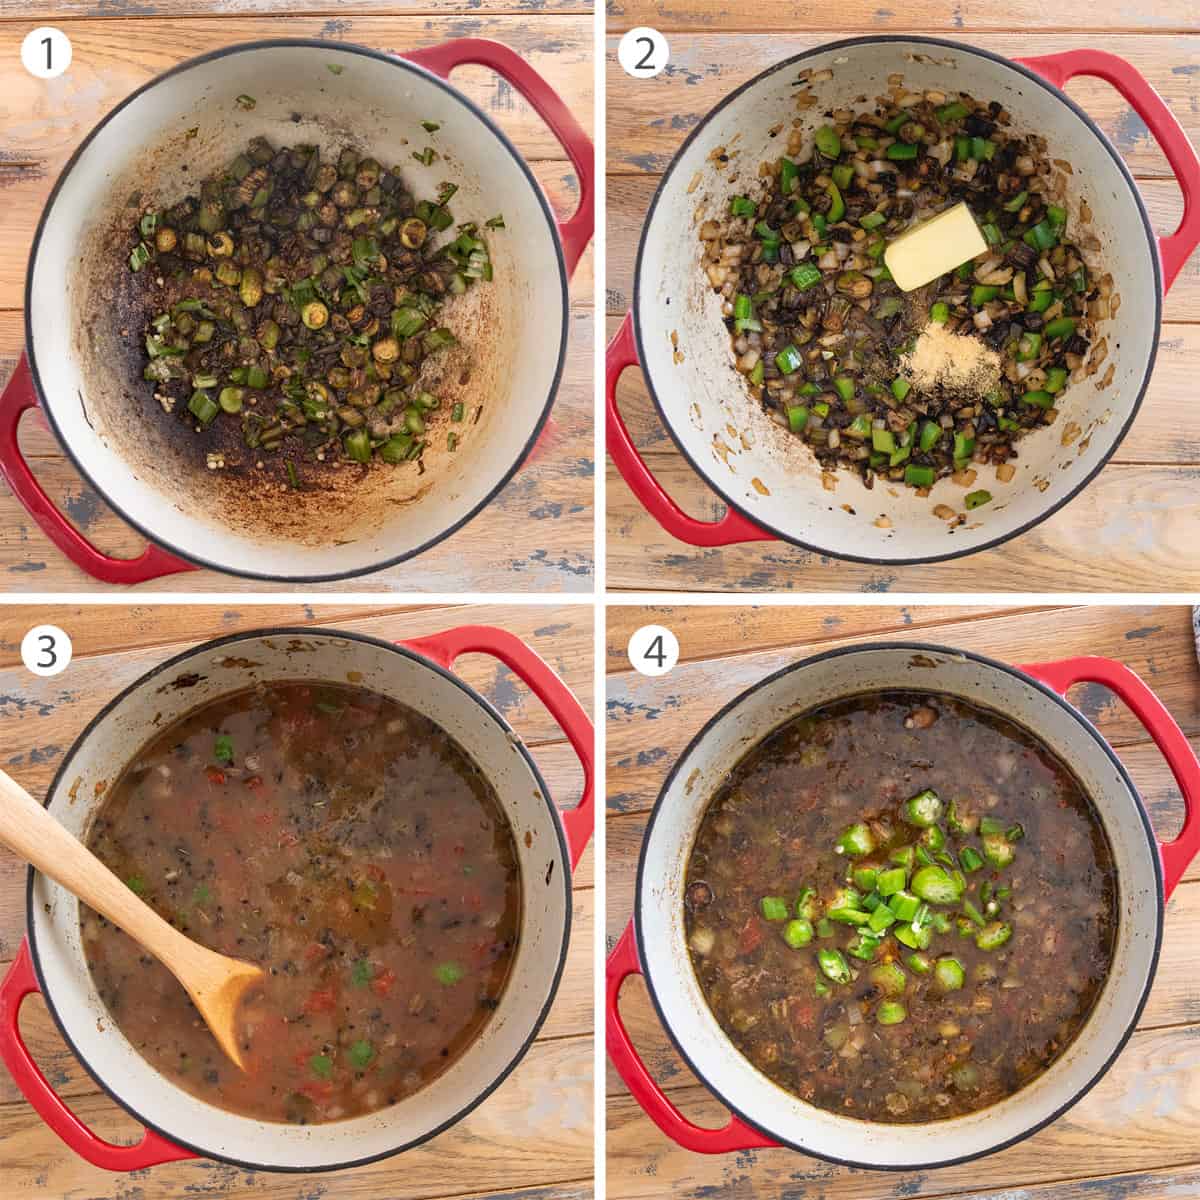 Collage of steps to make a seafood gumbo with okra including browning the vegetables, adding stock, and seasonings.